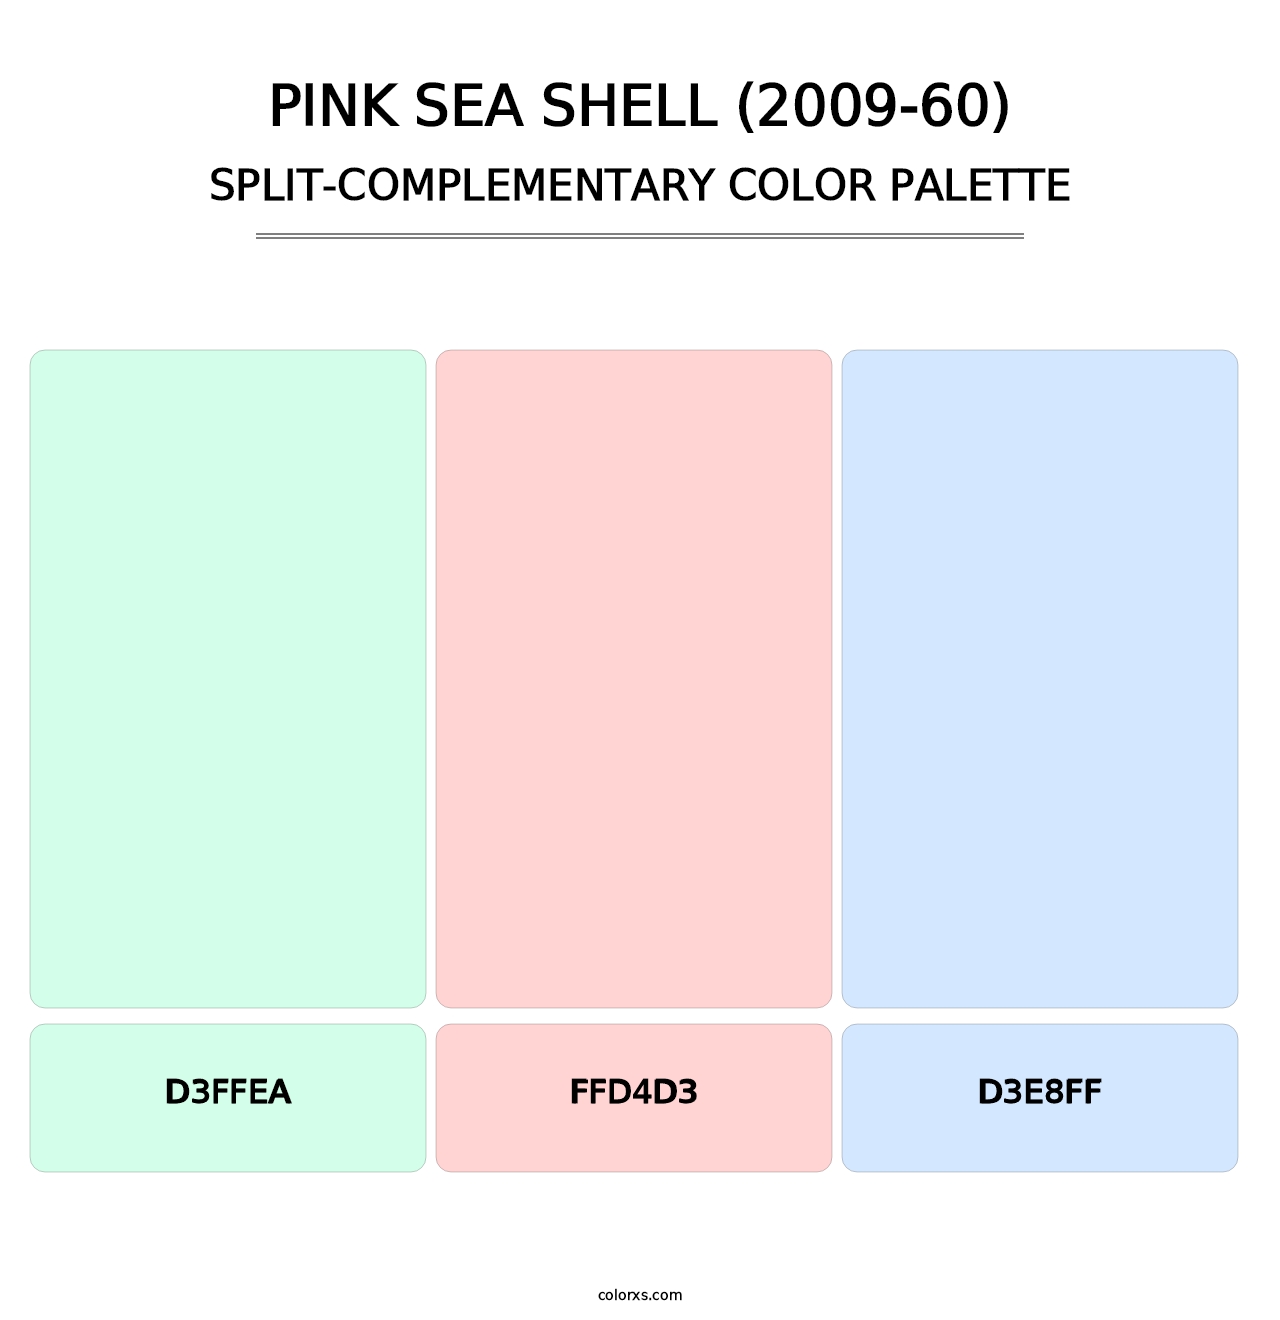 Pink Sea Shell (2009-60) - Split-Complementary Color Palette